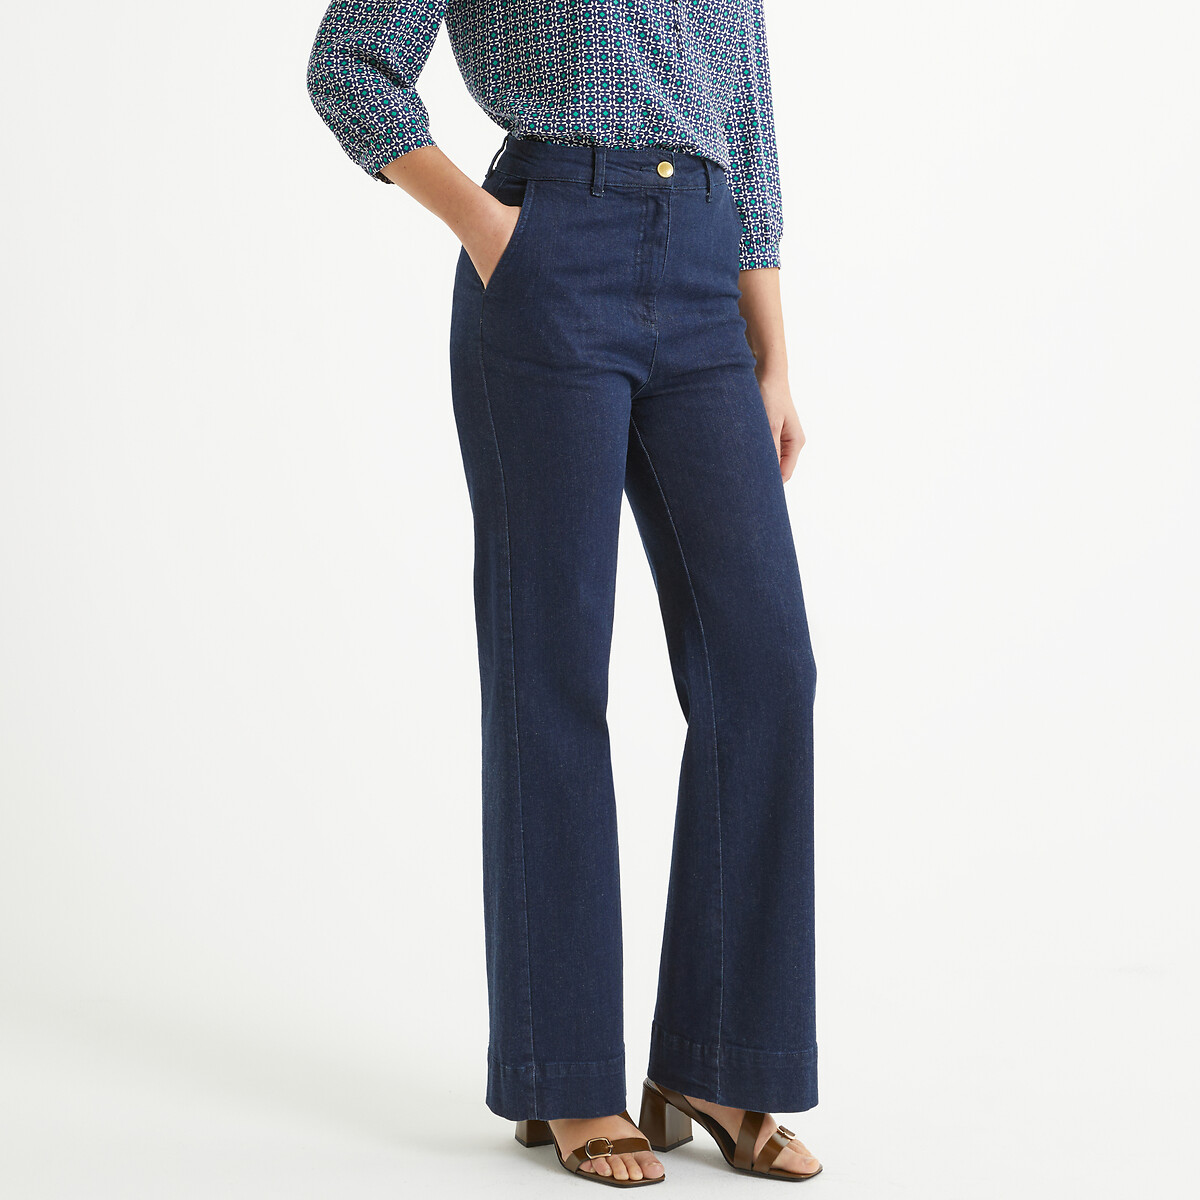 Image of Wide Leg Jeans, Length 31.5"